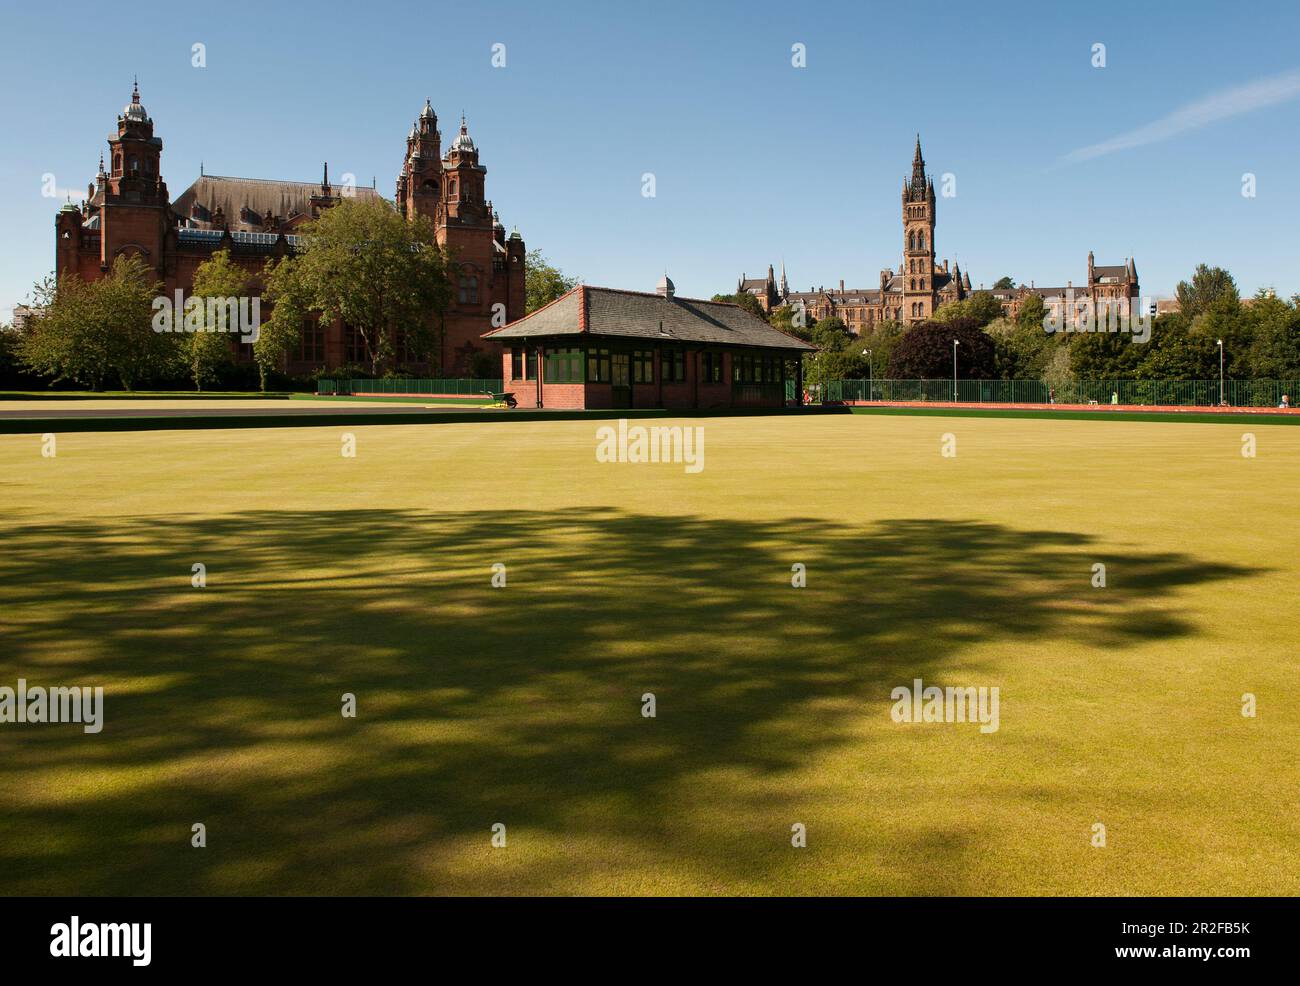 The pavilion of Kelvingrove lawn bowling green in front of Kelvingrove Art Gallery and Museum and the University of Glasgow in Glasgow, Scotland, UK Stock Photo